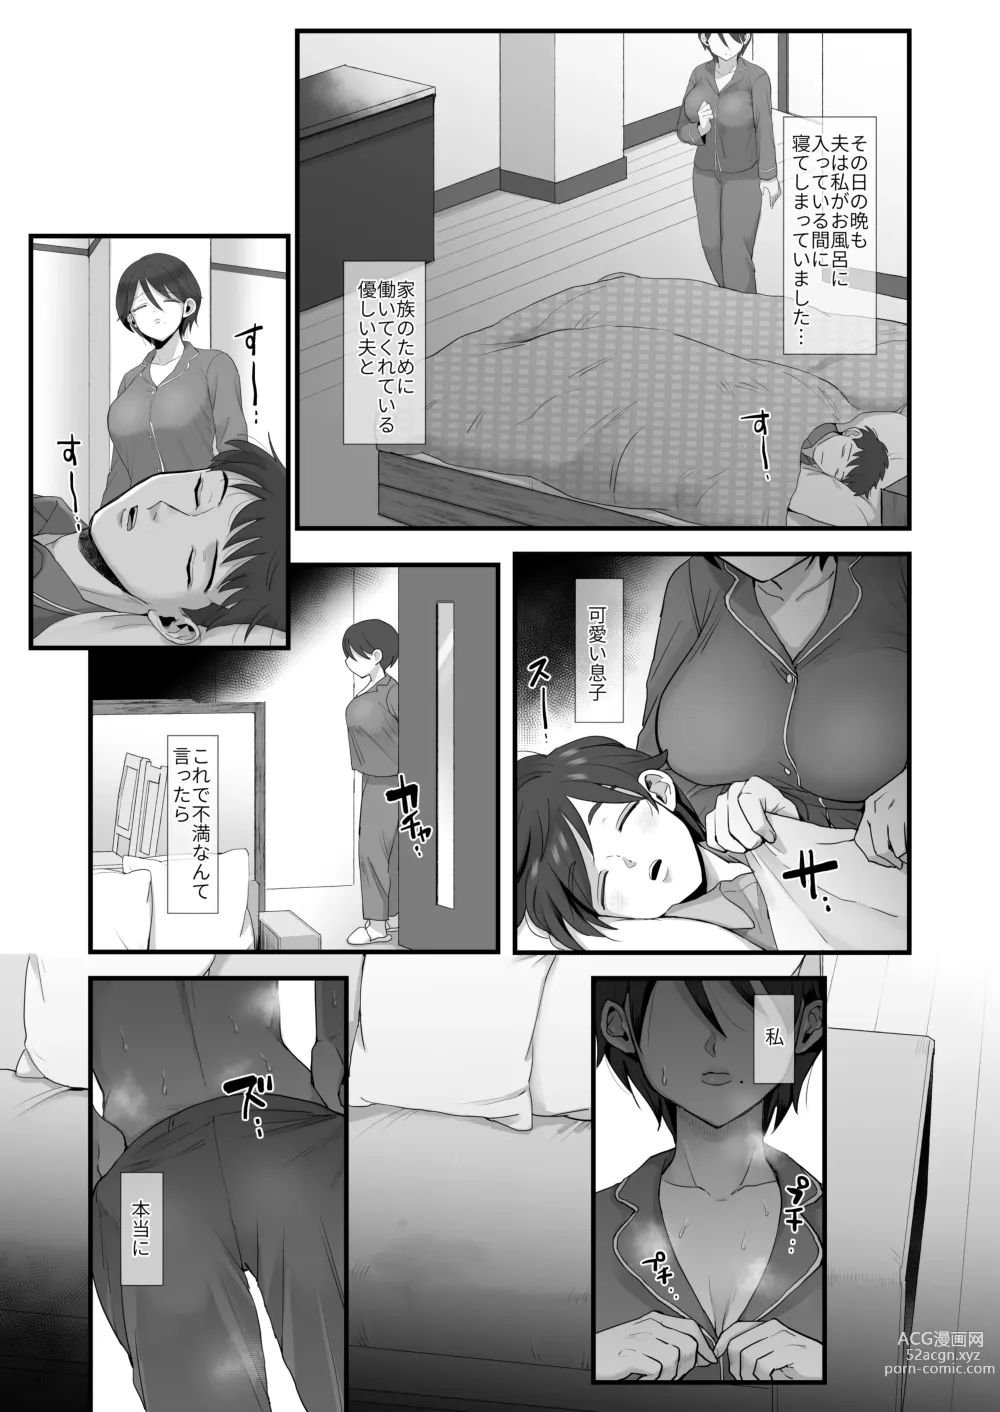 Page 27 of doujinshi Gentle, Busty, Narrow Eyed Momma.